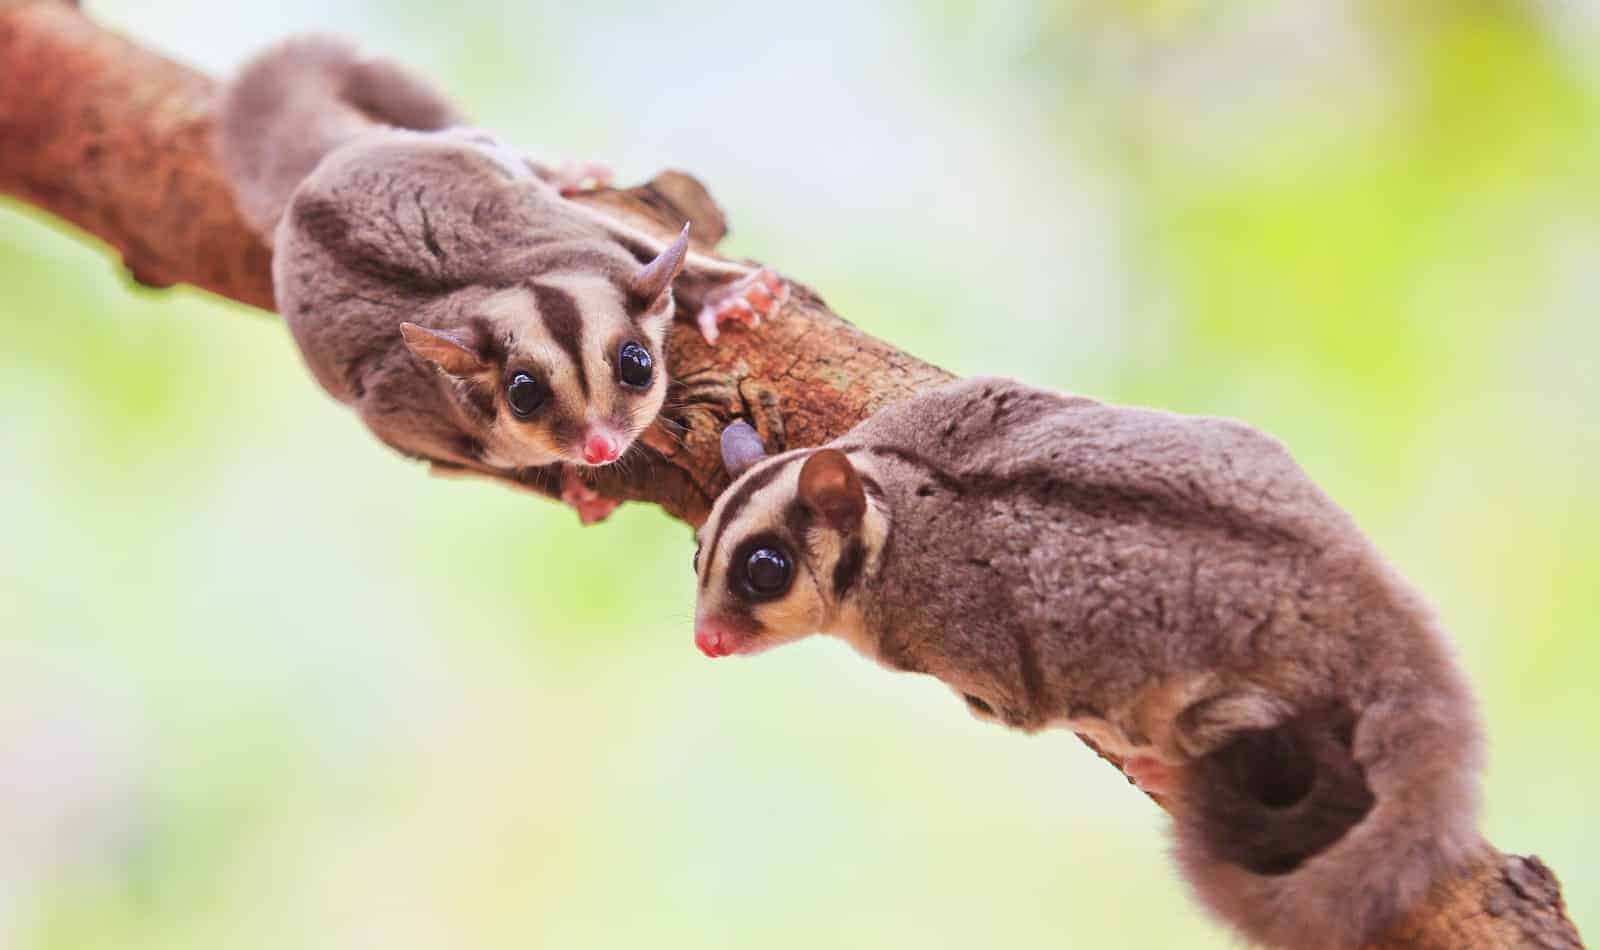 Looking for an easy guide to sugar glider care for new owners? We've covered all of the basics, from diet to housing and more in our quick start guide.